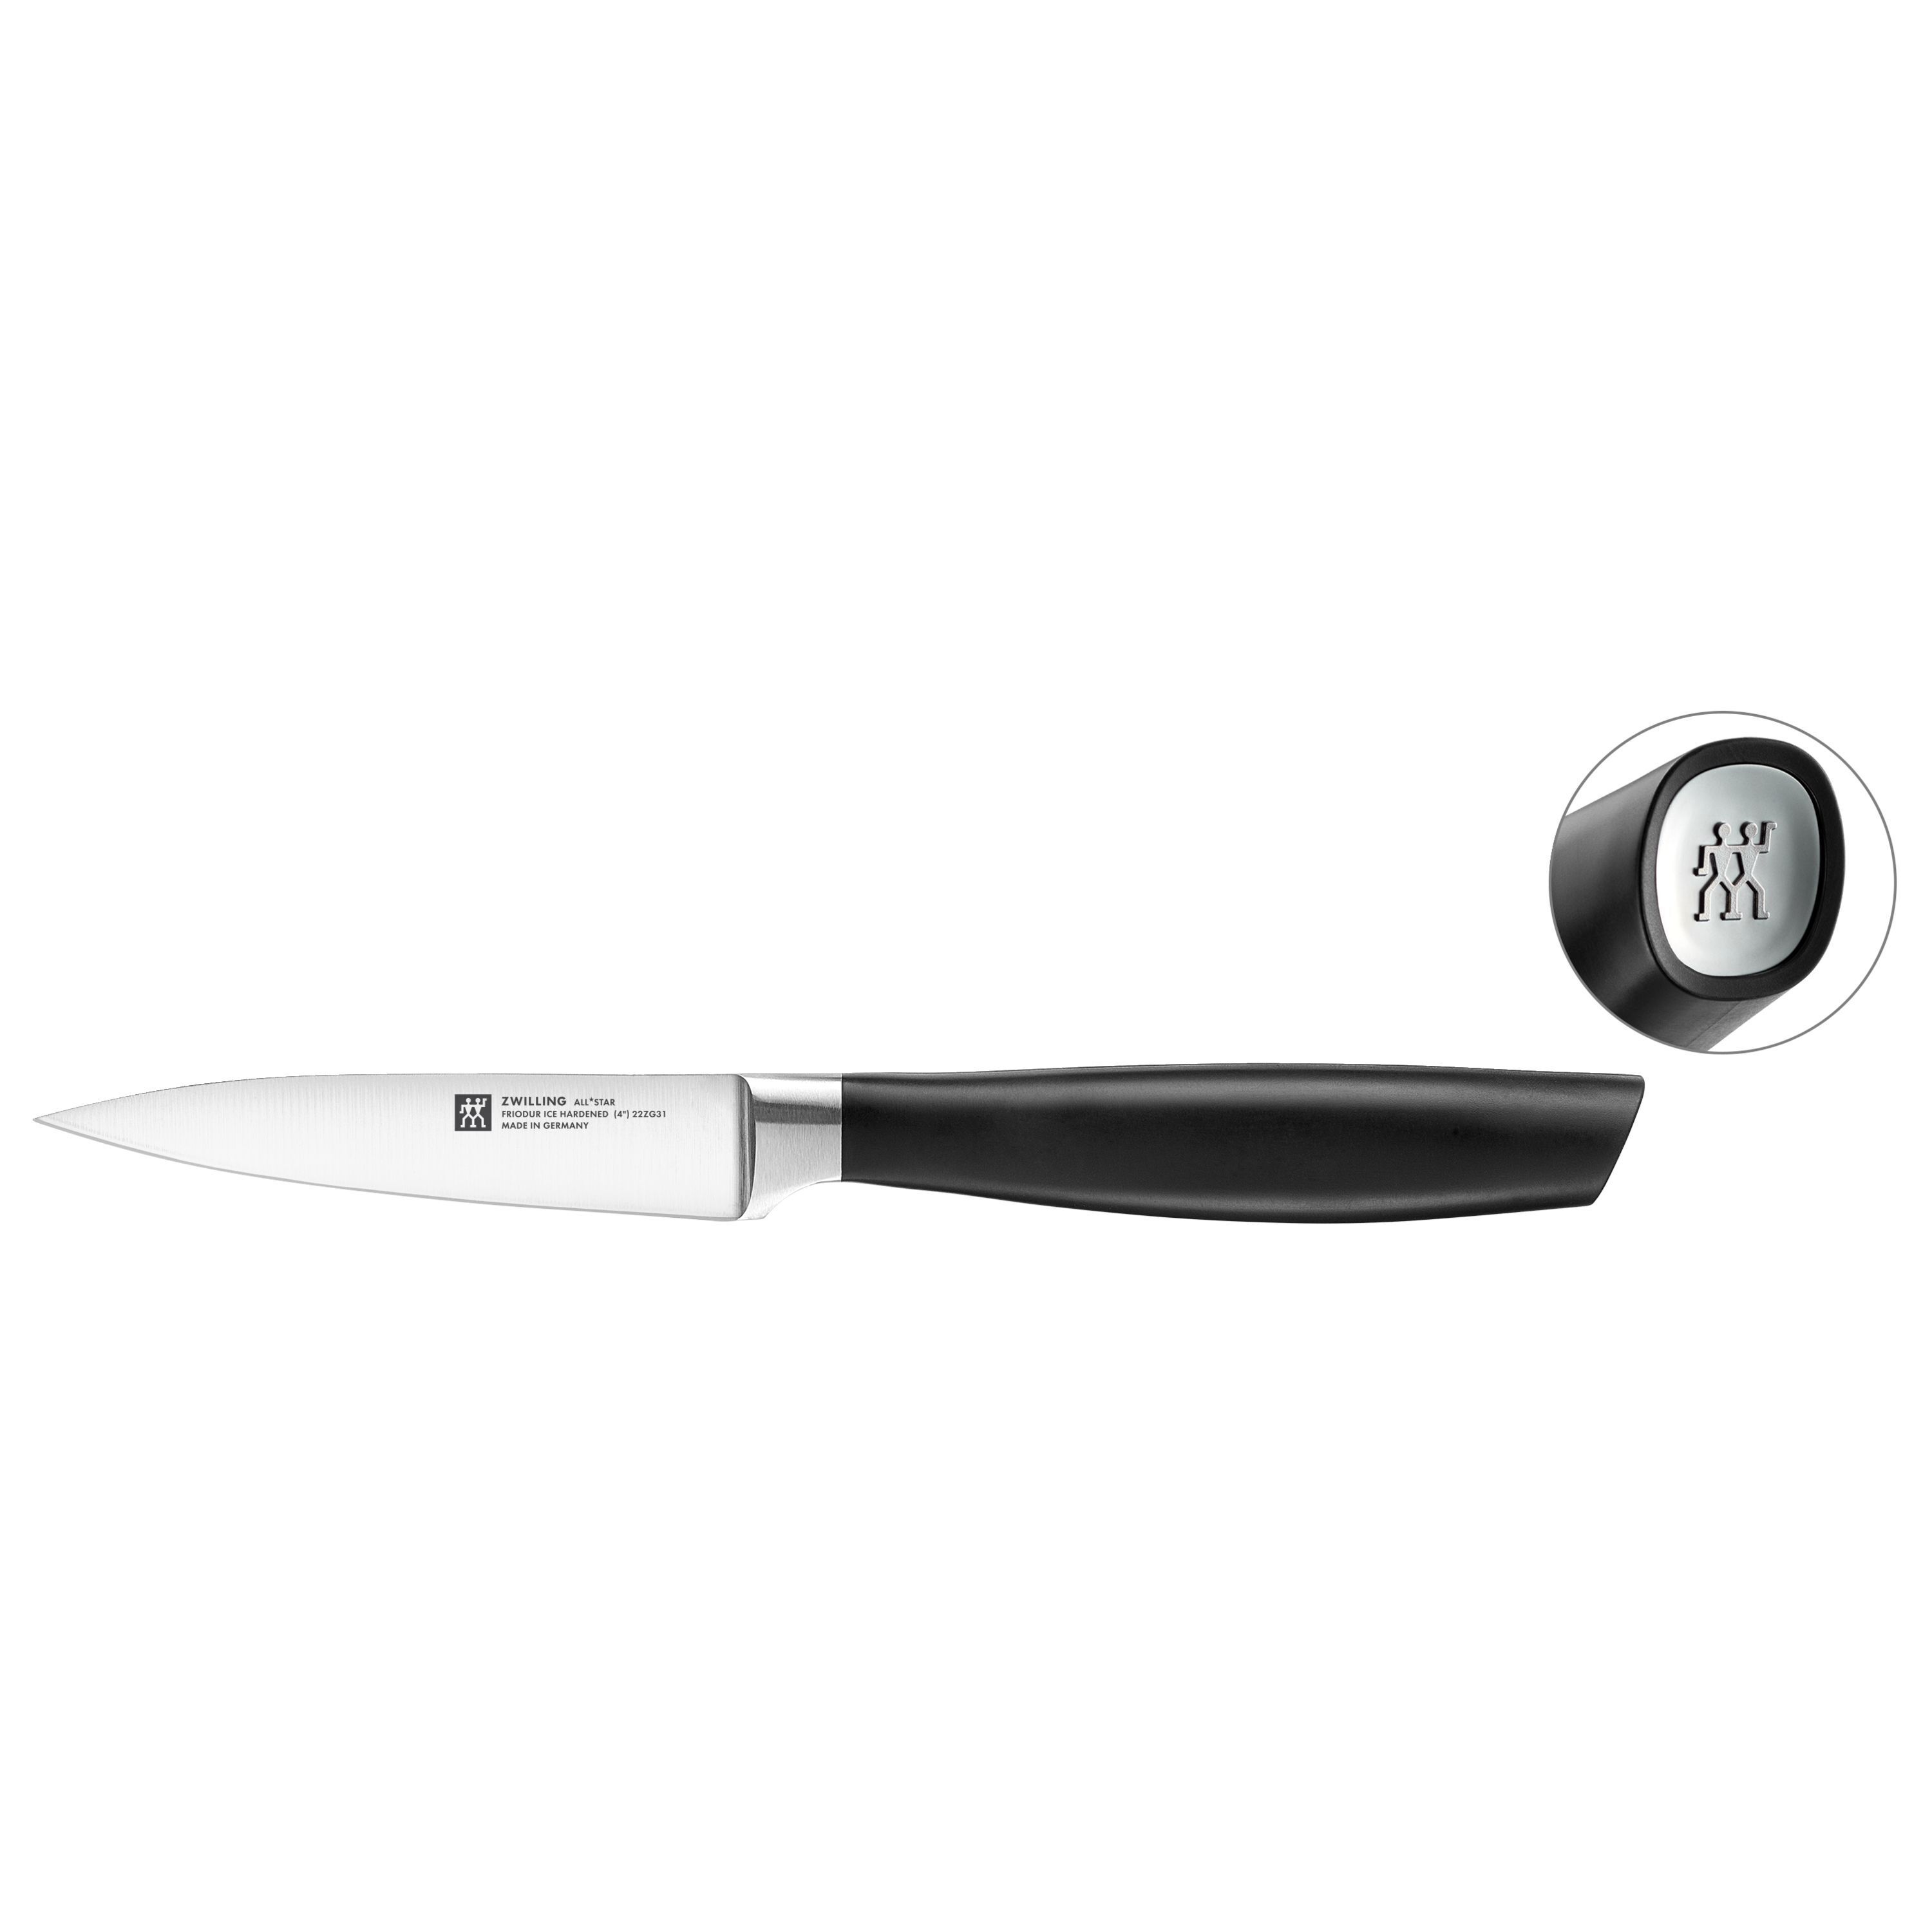 ZWILLING All * Star Spelucchino 10 cm, argento